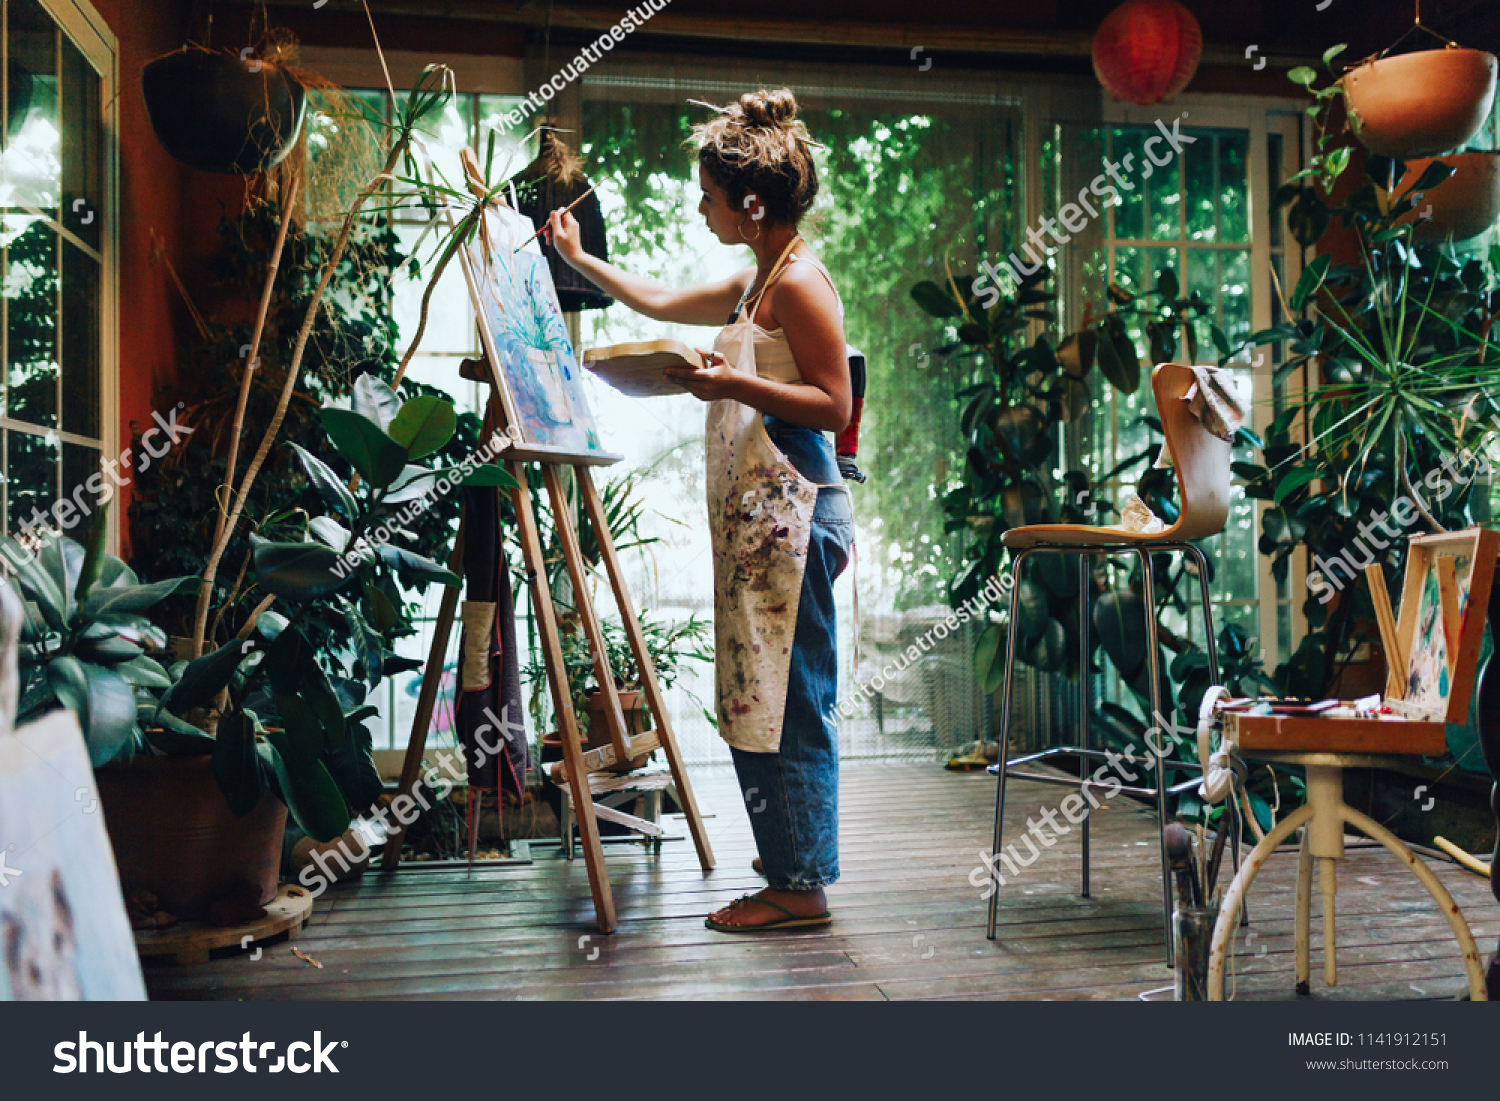 Indoor shot of professional female artist painting on canvas in studio with plants. #1141912151